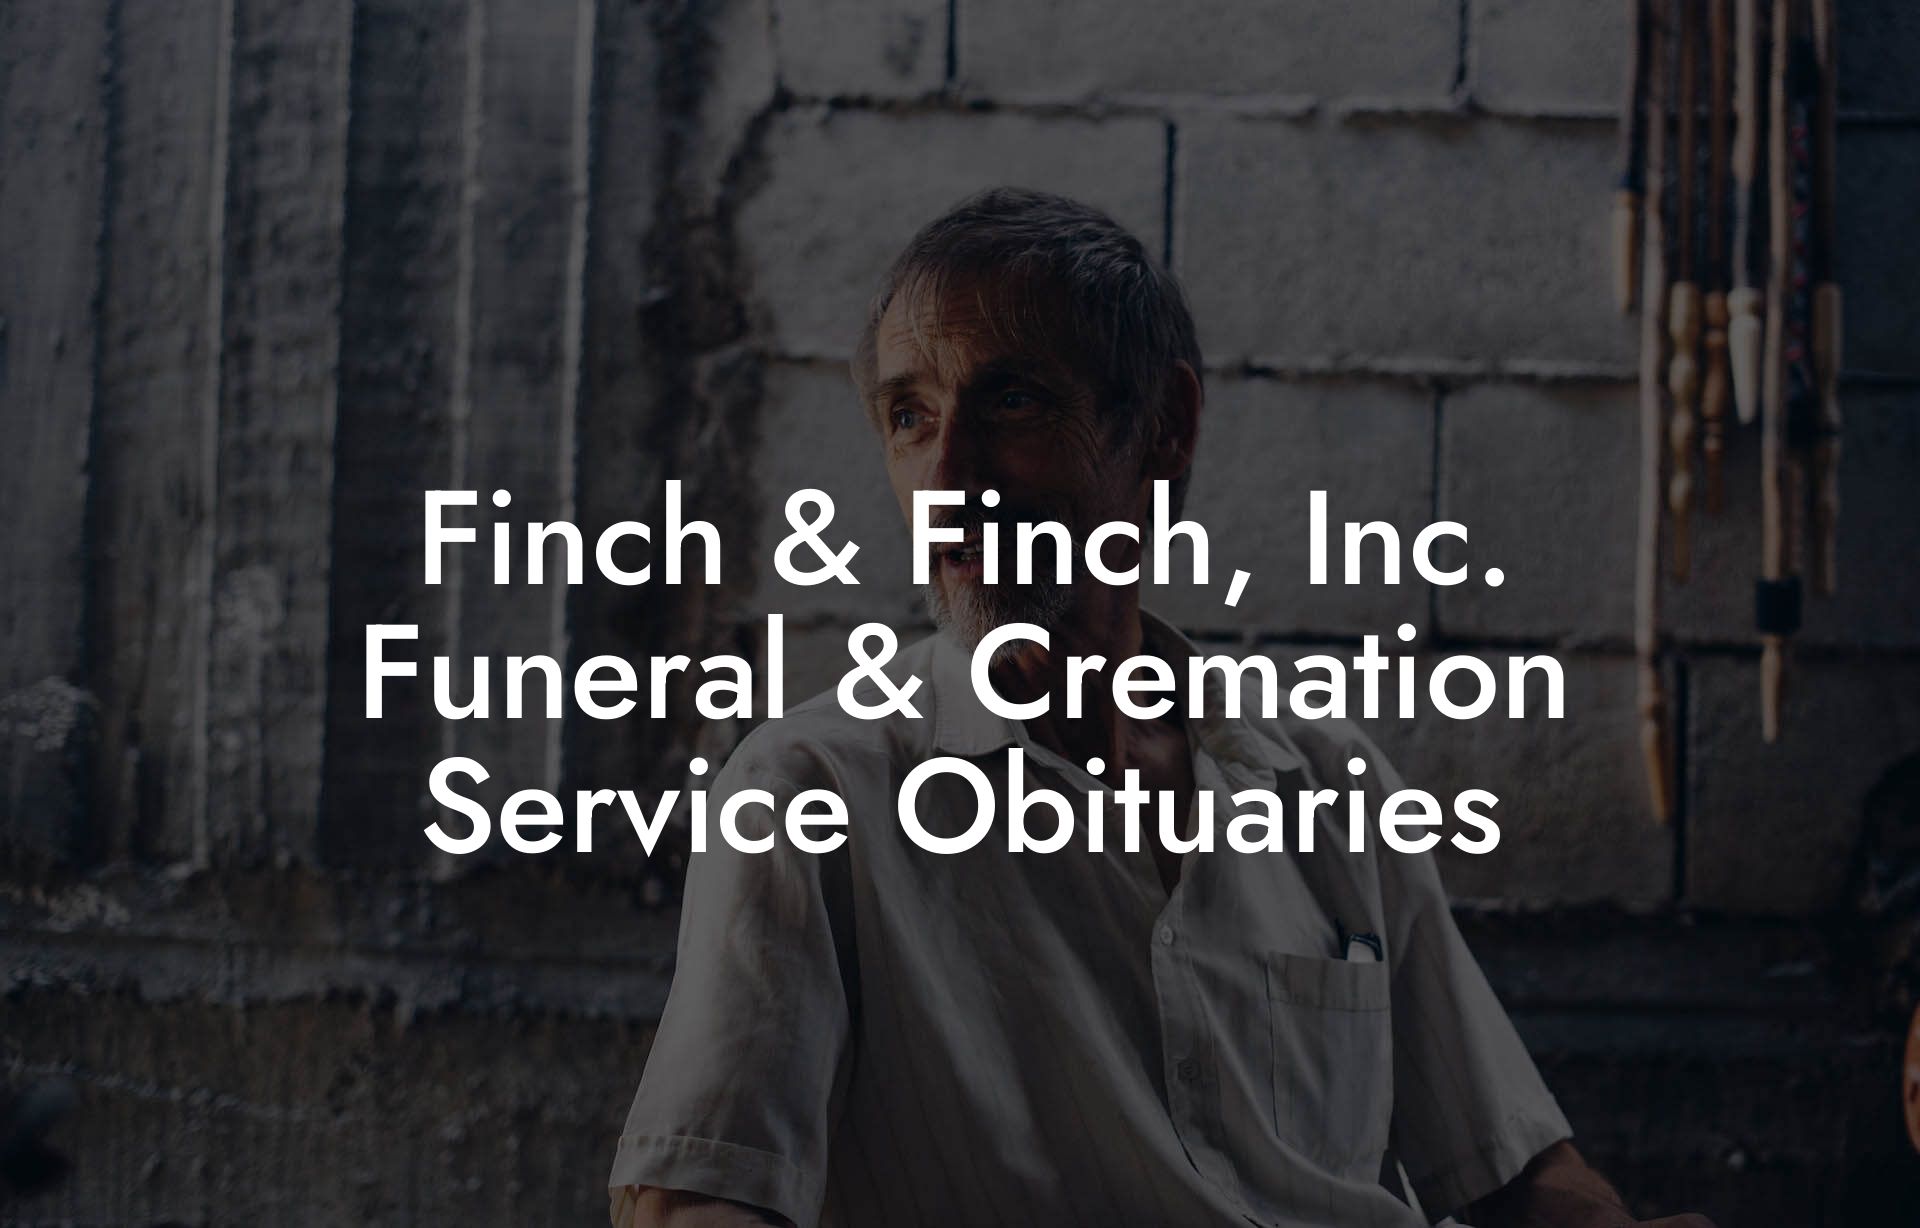 Finch & Finch, Inc. Funeral & Cremation Service Obituaries